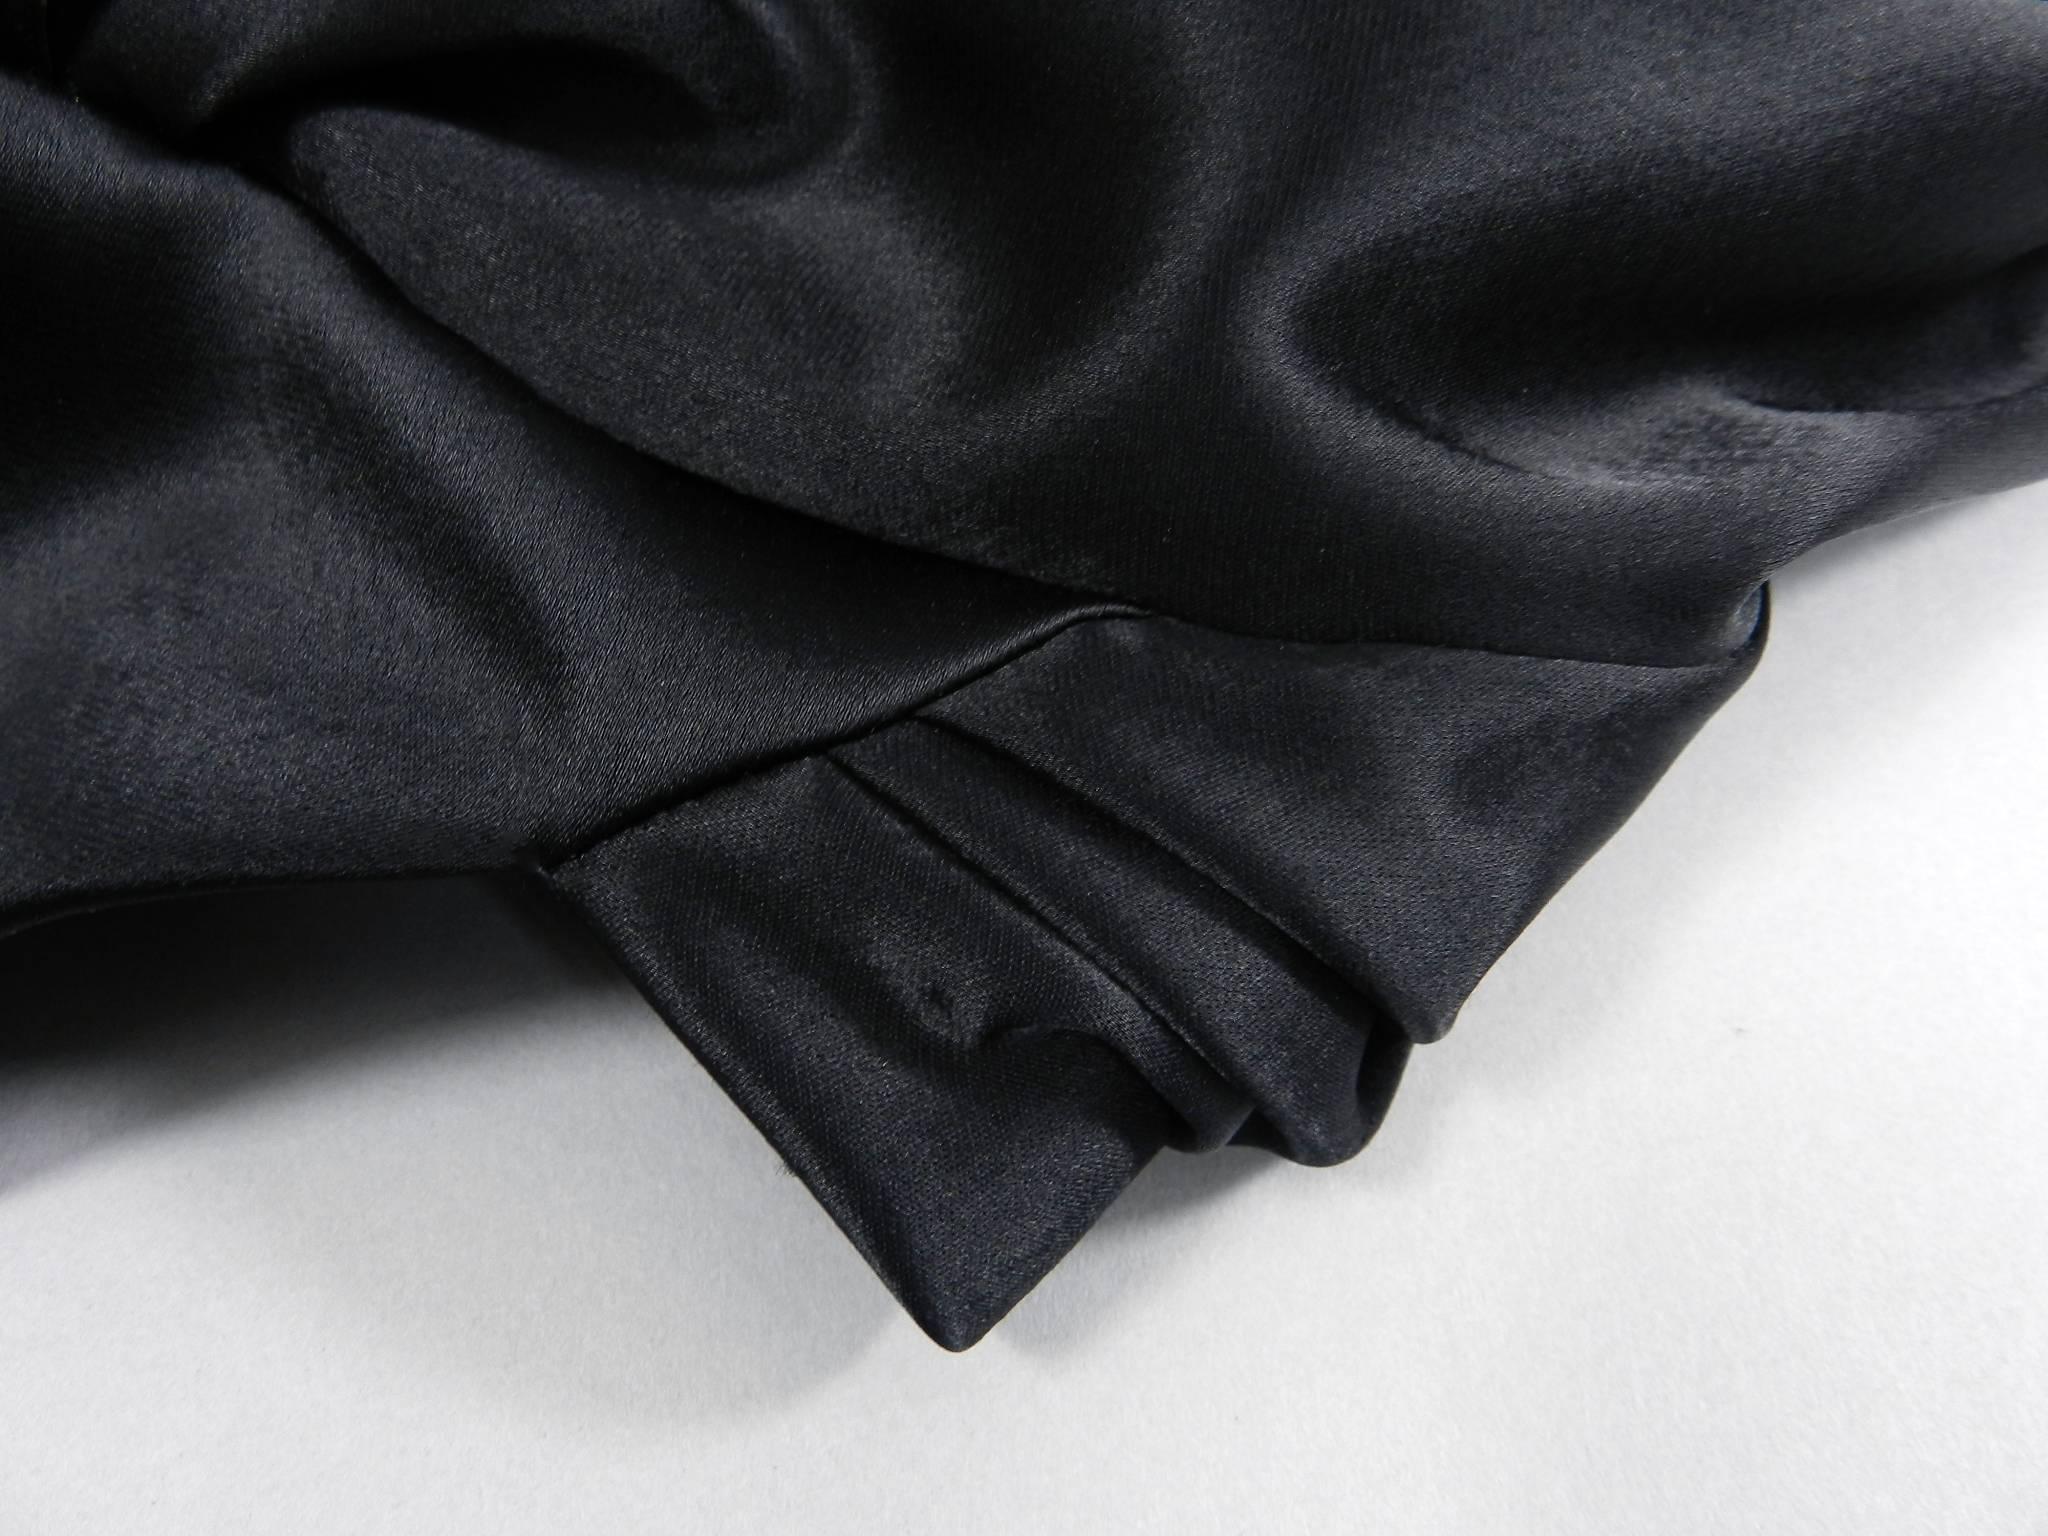 Balenciaga Nicholas Ghesquiere Fall 2009 Black Satin Gathered Dress In Excellent Condition In Toronto, ON